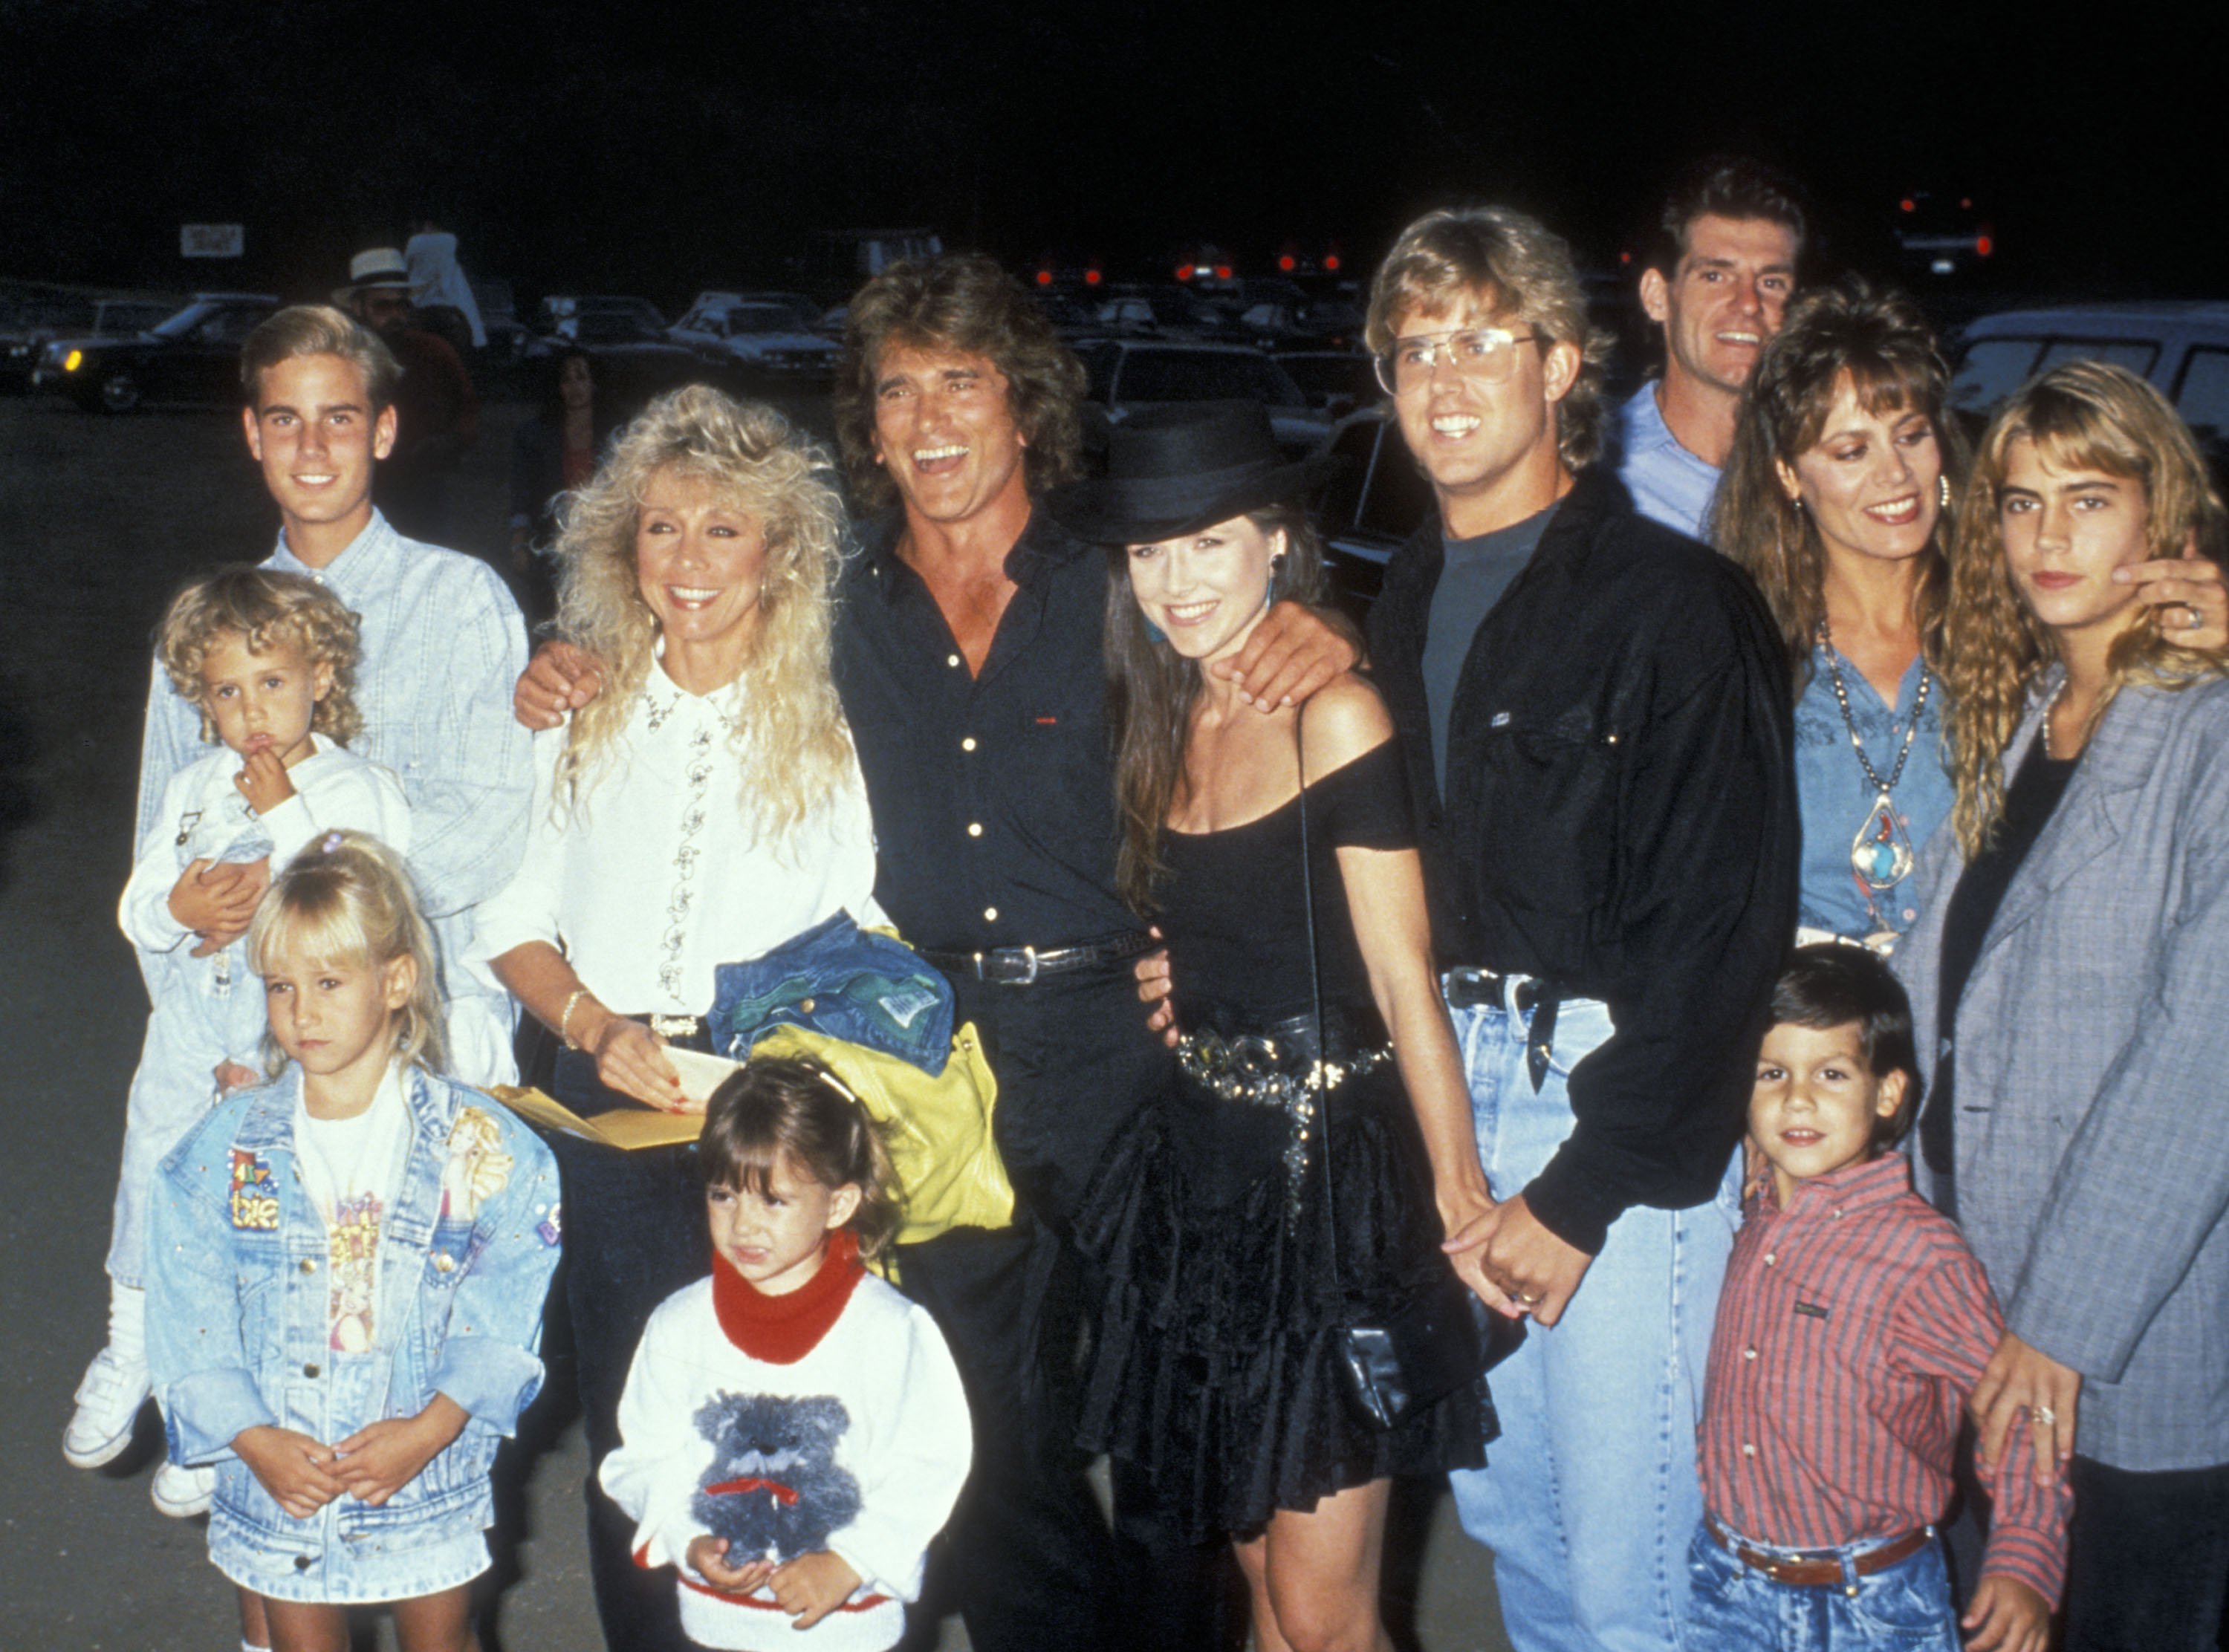 Christopher Landon and date, Sean Landon, Jennifer Landon, Cindy Clerico, actor Michael Landon, Michael Landon Jr. and date, Mark Landon, Leslie Landon and Shawna Landon attend Third Annual Moonlight Roundup Benefiting Free Arts for Abused Children on July 29, 1989 at Calamigos Ranch in Malibu, California | Source: Getty Images